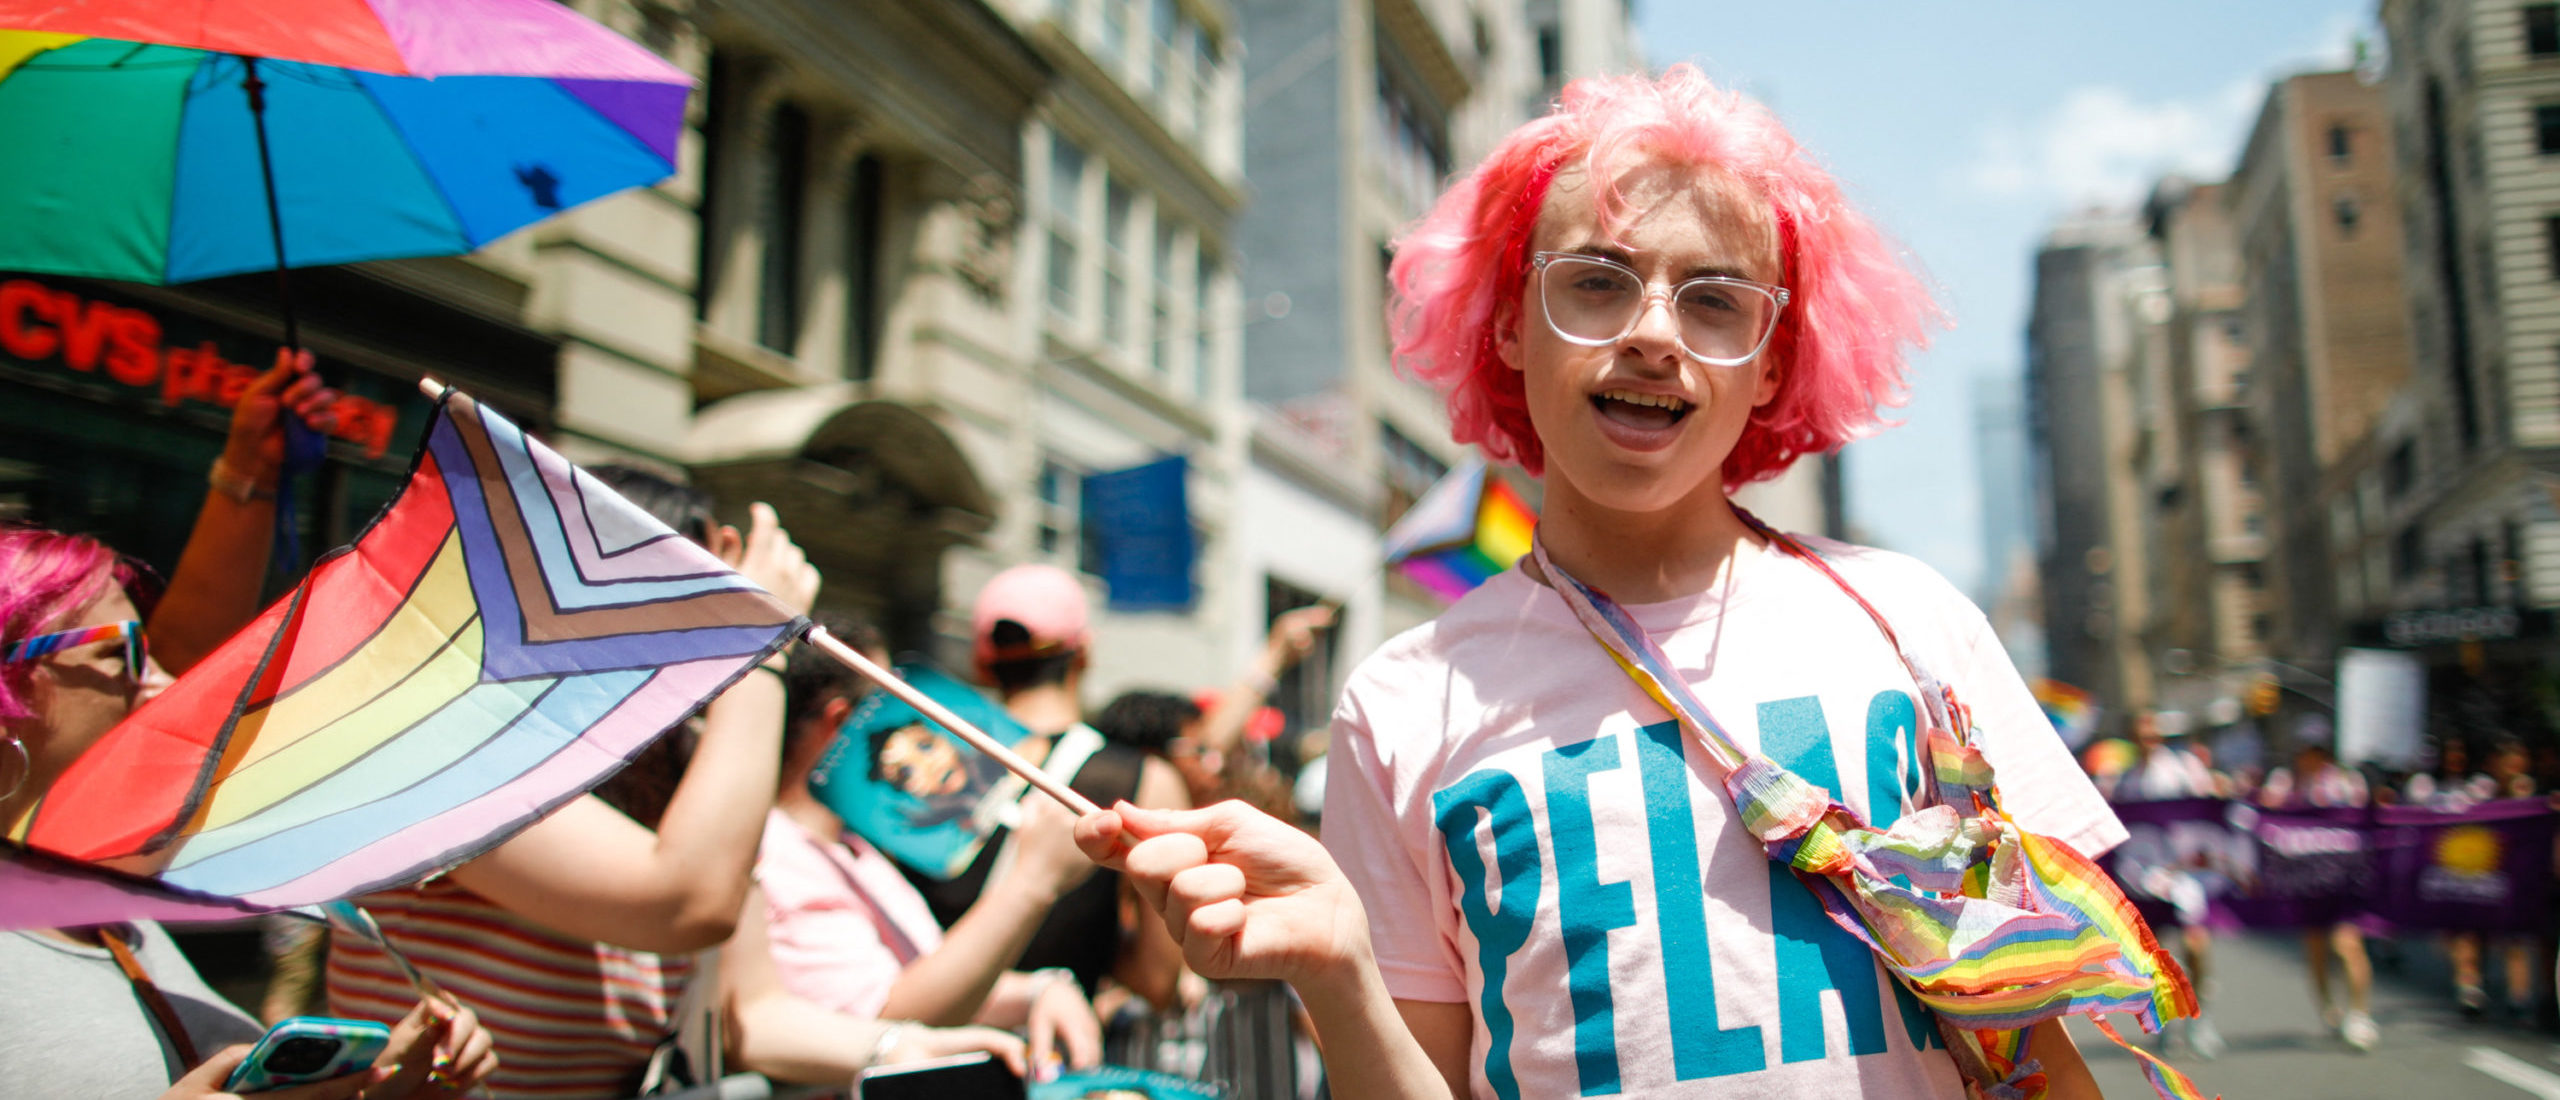 LBGTQ activist Desmond Napoles, 16, marches during the annual New York Pride march in New York City on June 25, 2023. (Photo by KENA BETANCUR/AFP via Getty Images)